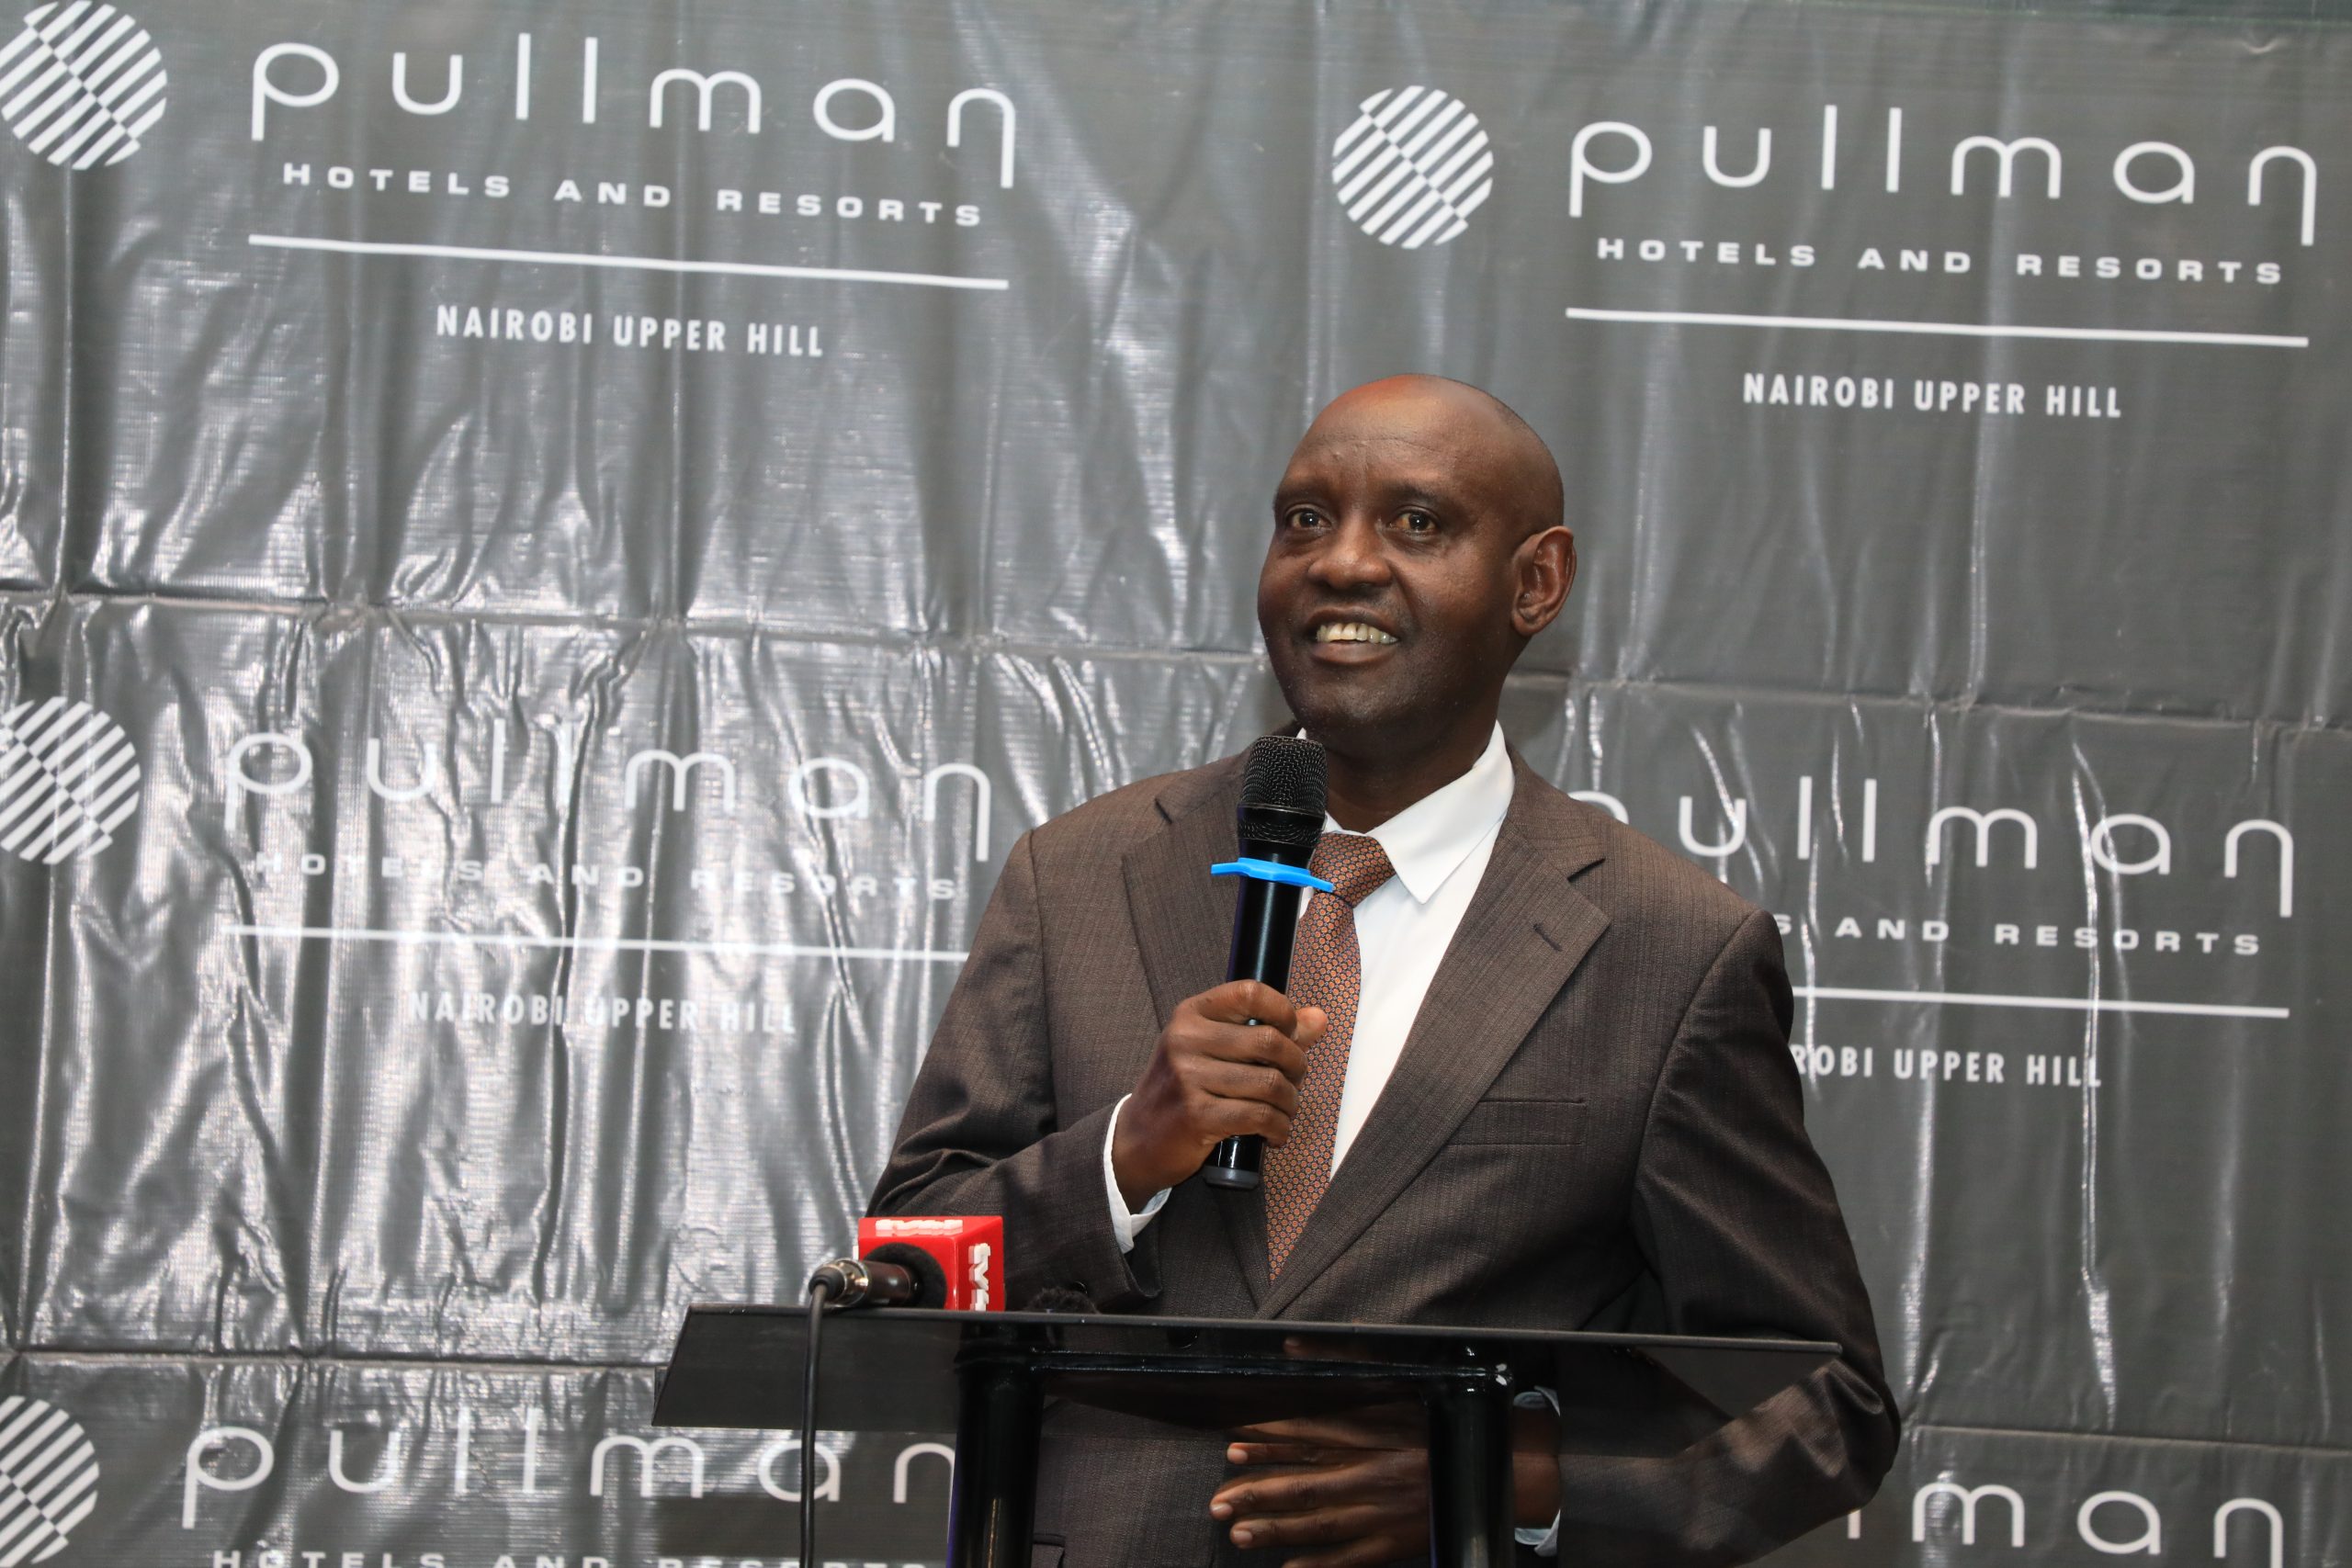 PS John Ololtuaa at the official launch of pullman hotel in Nairobi.